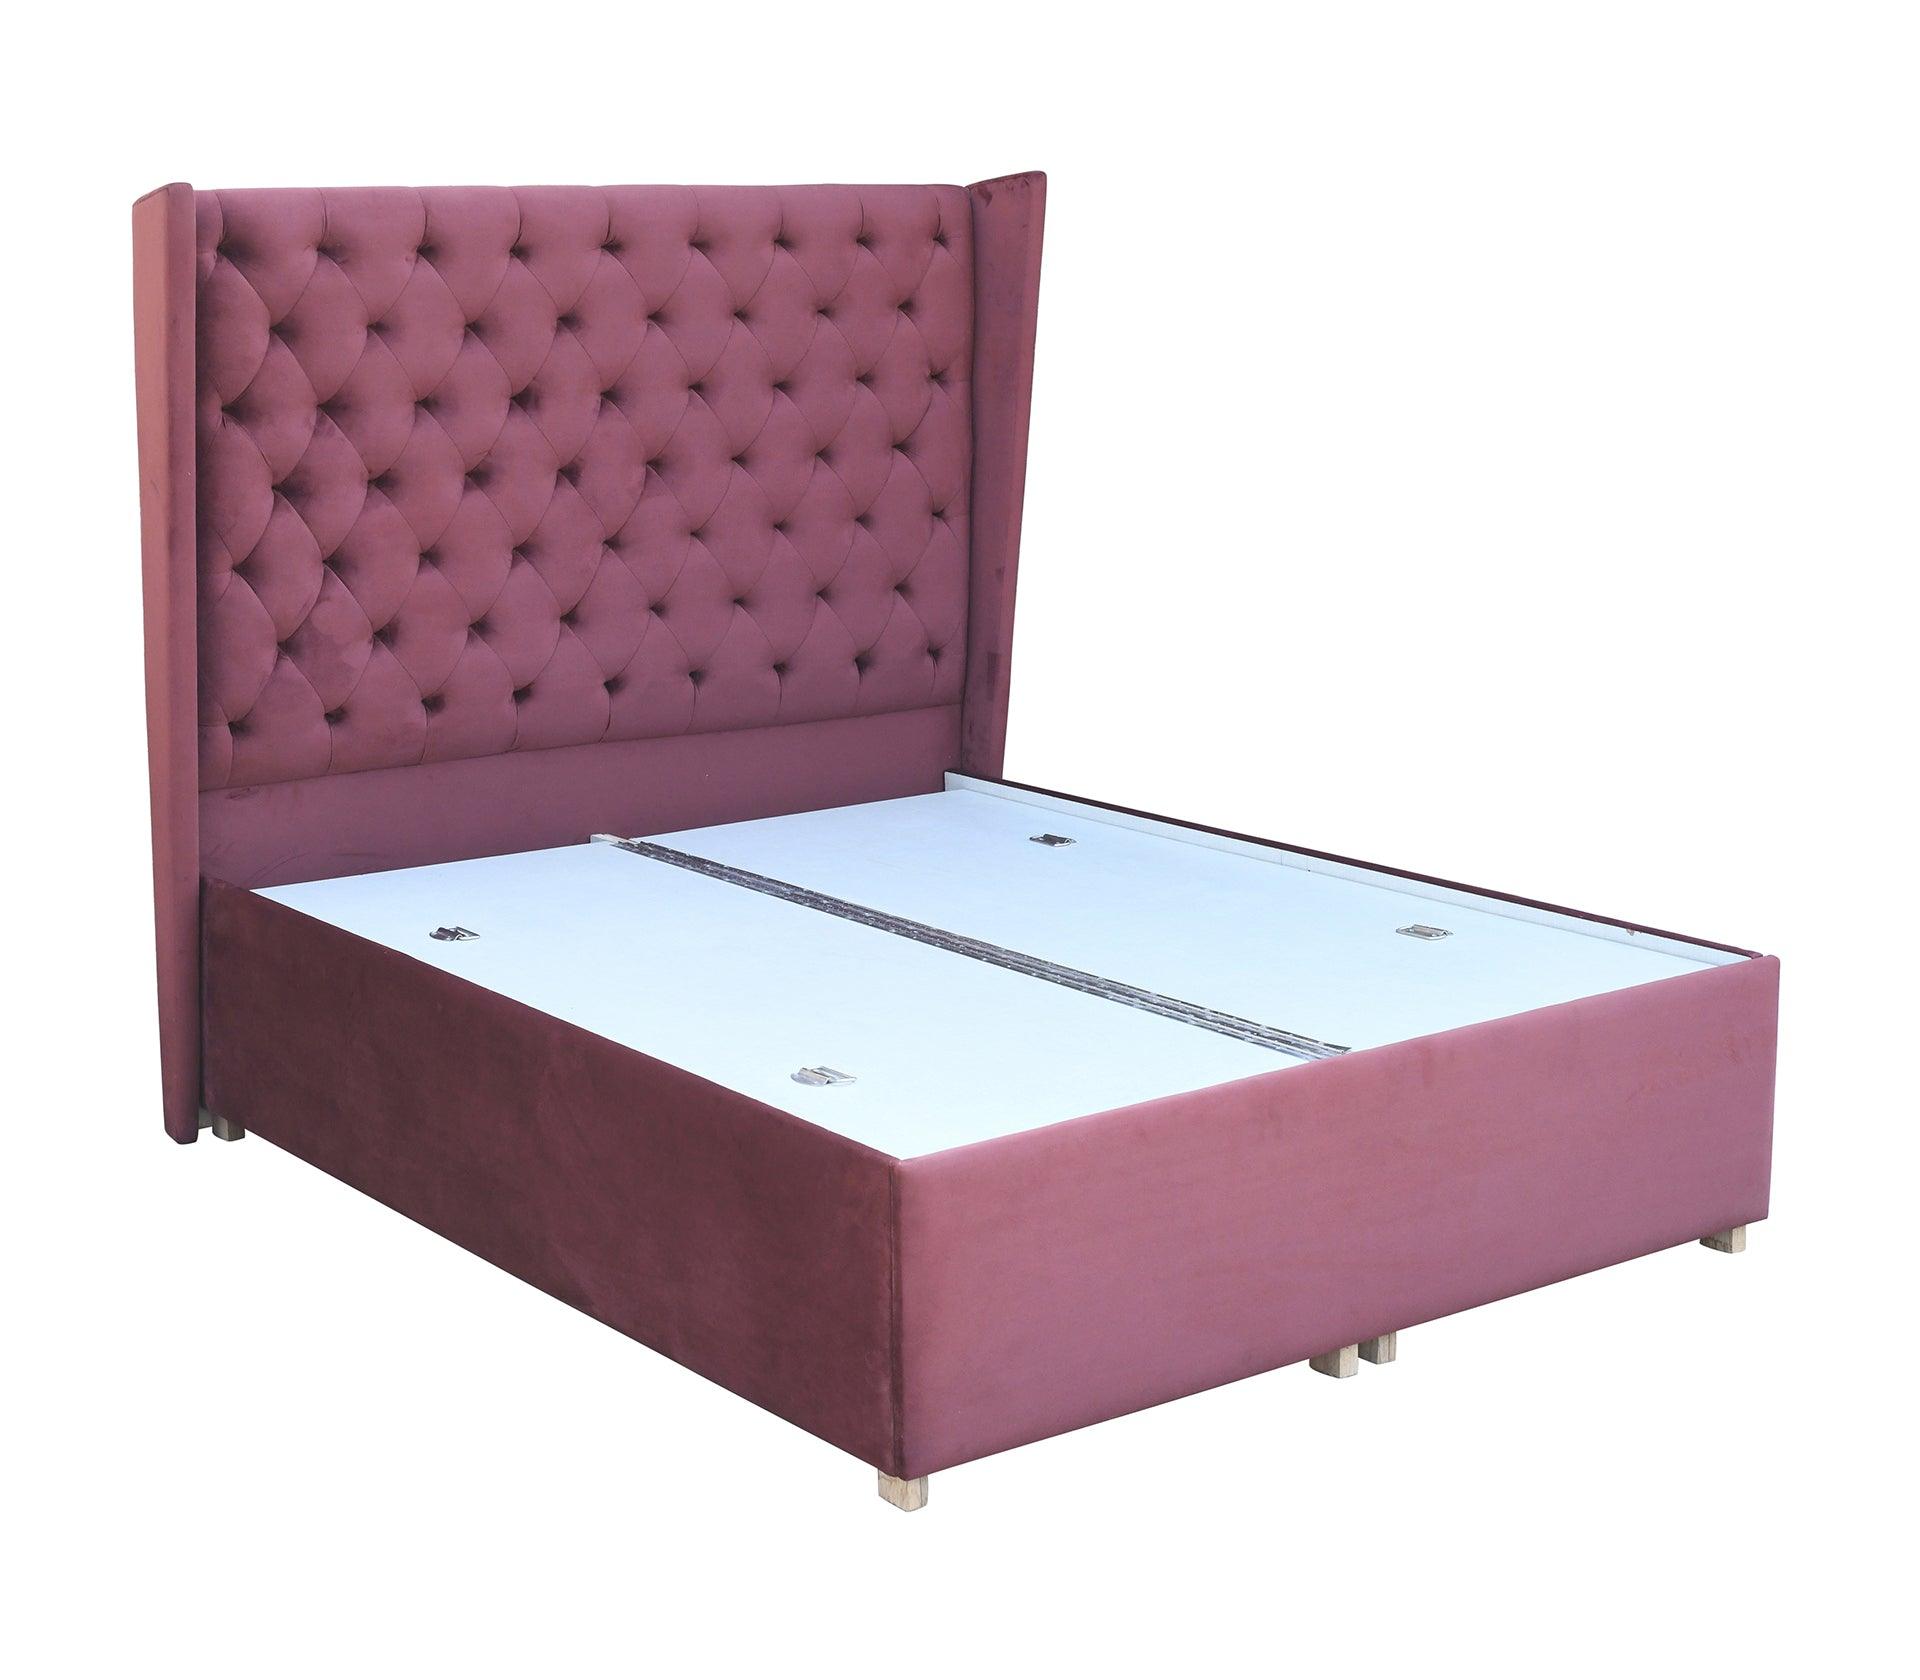 Garvey Grape Queen Bed With Storage - Furniture Castle